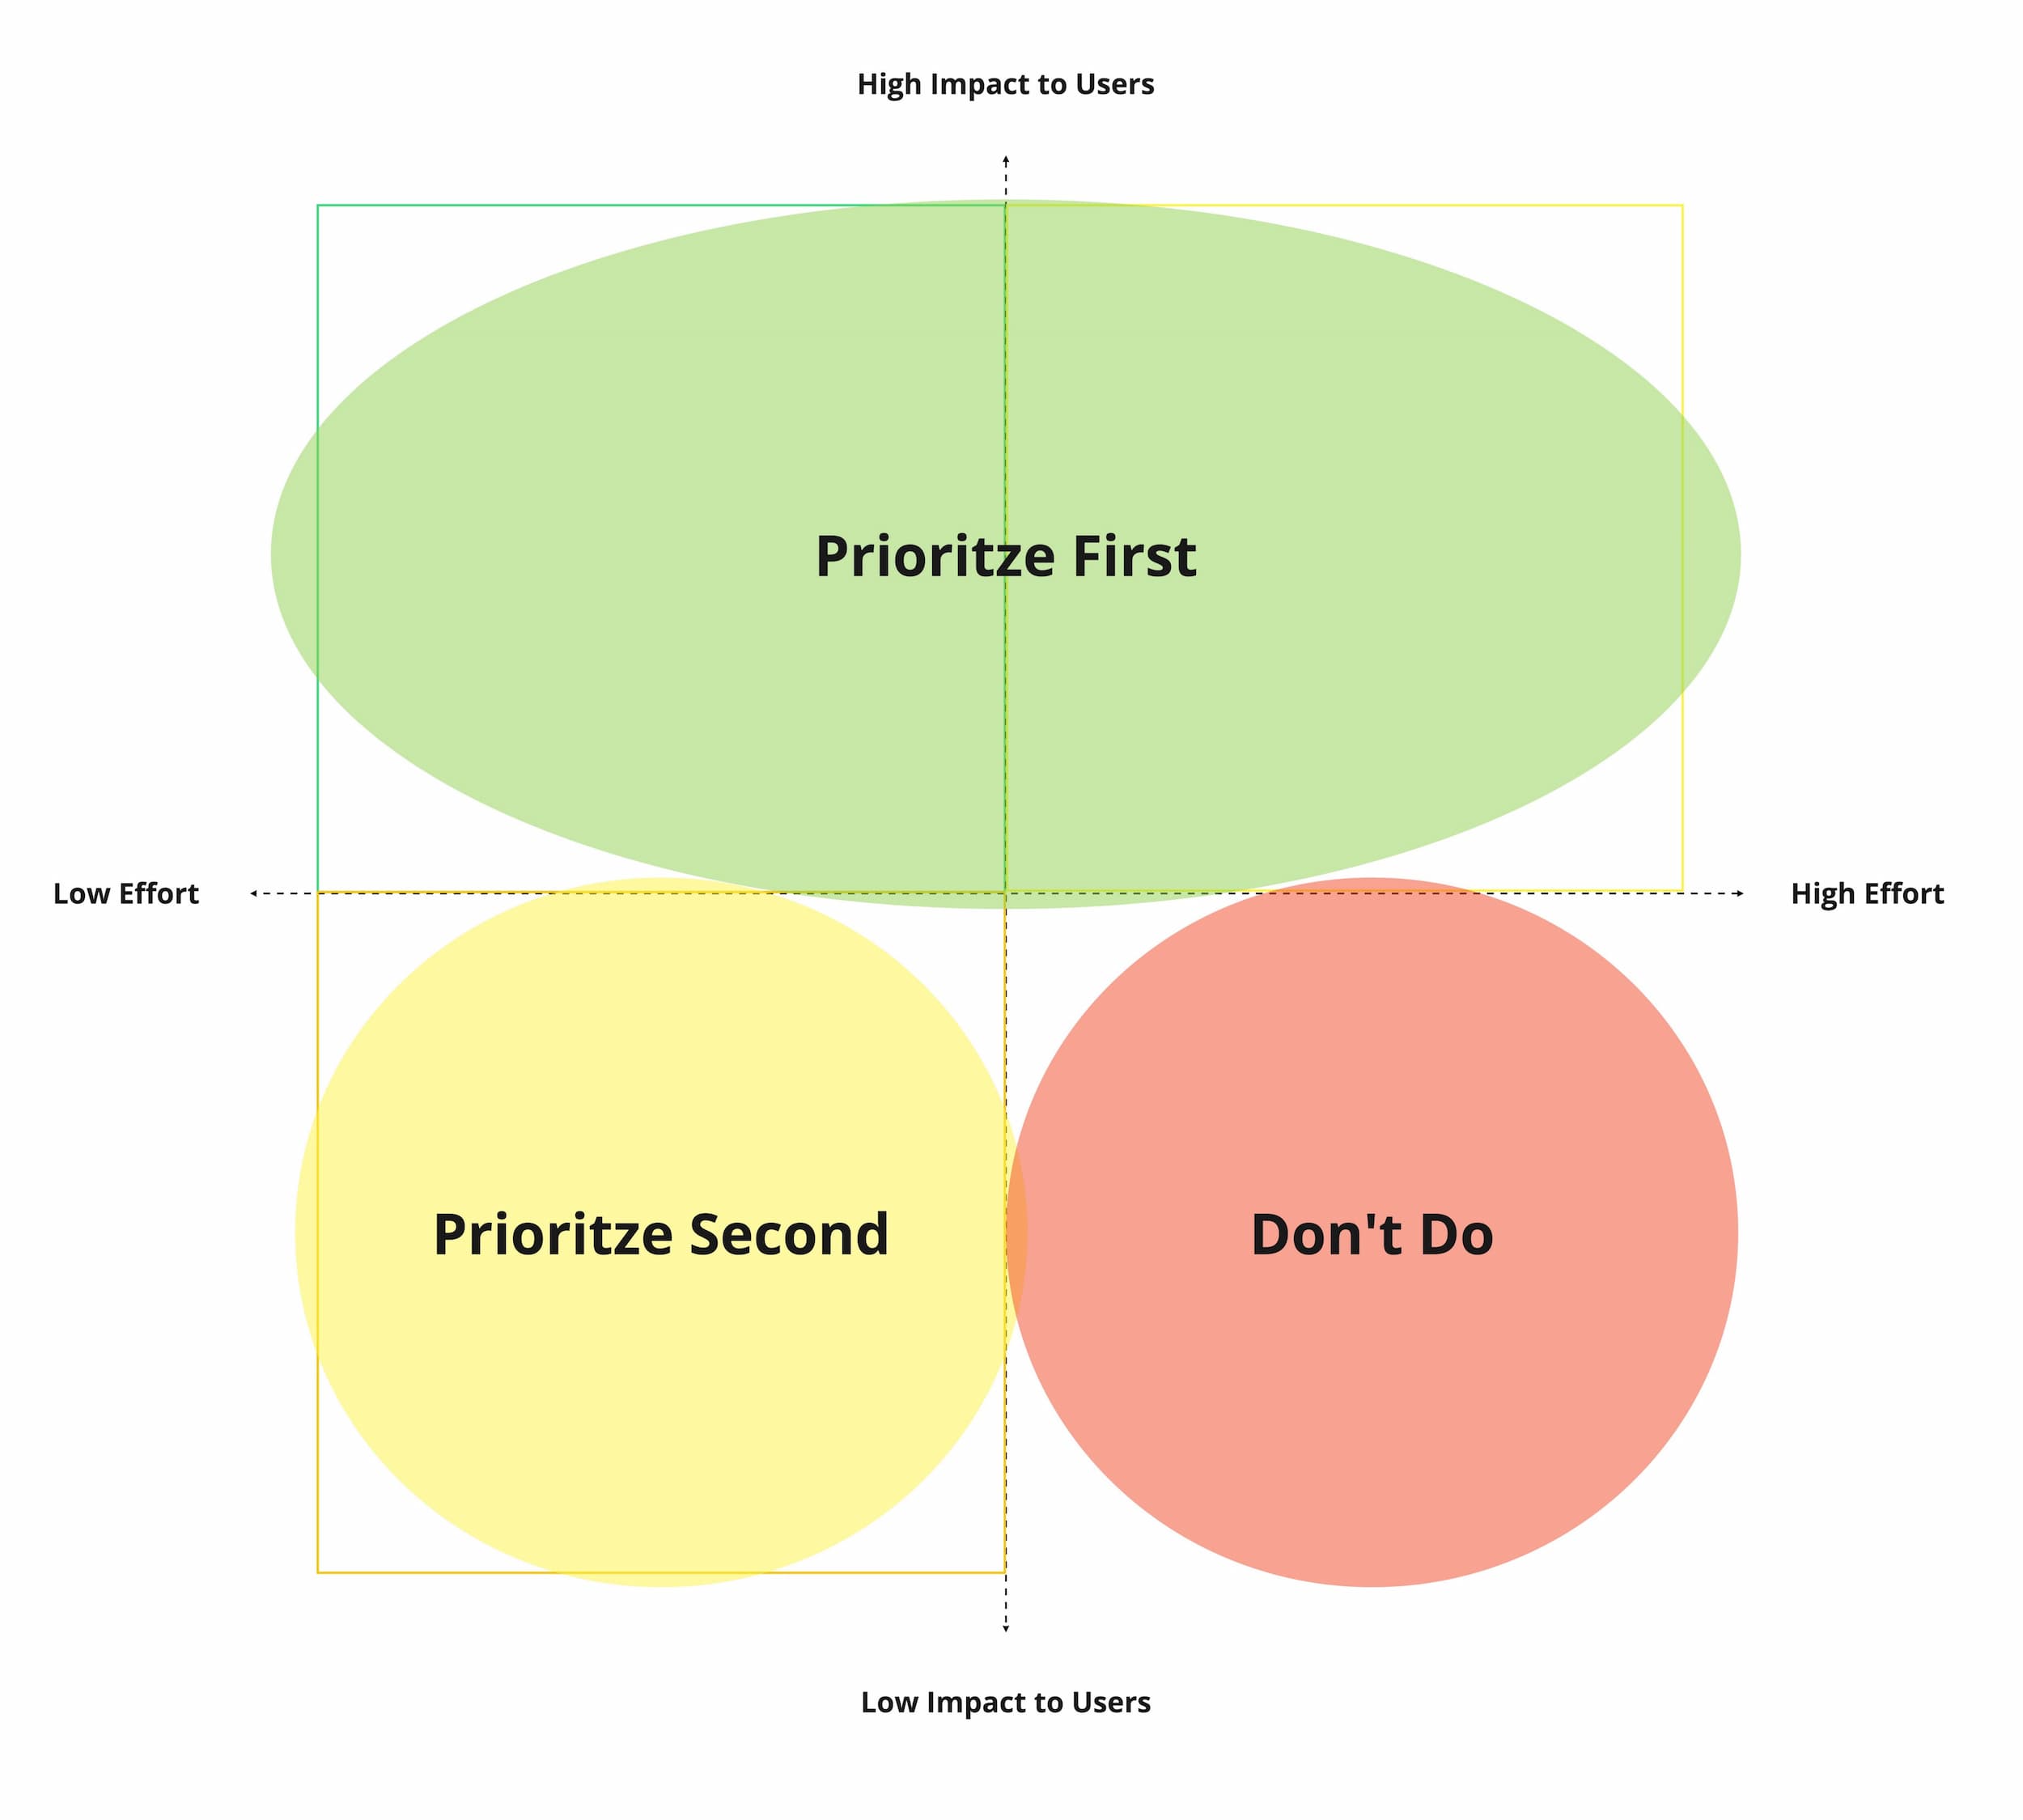 A matrix showing what items to prioritize first, second, and never.